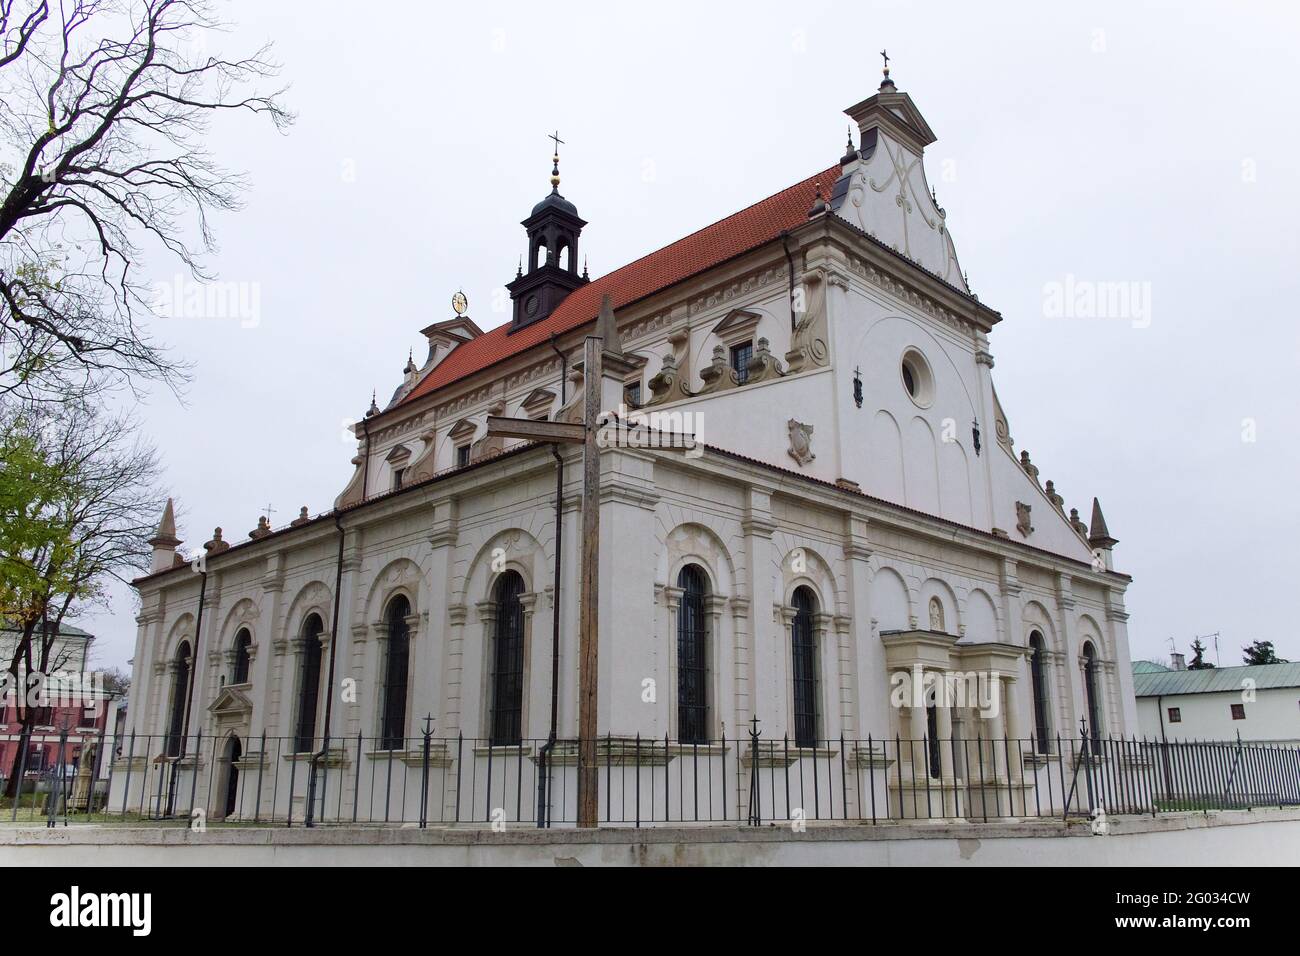 Cathedral of the Resurrection and St. Thomas the Apostle, Zamosc. Ancient European architecture, landmark. Stock Photo